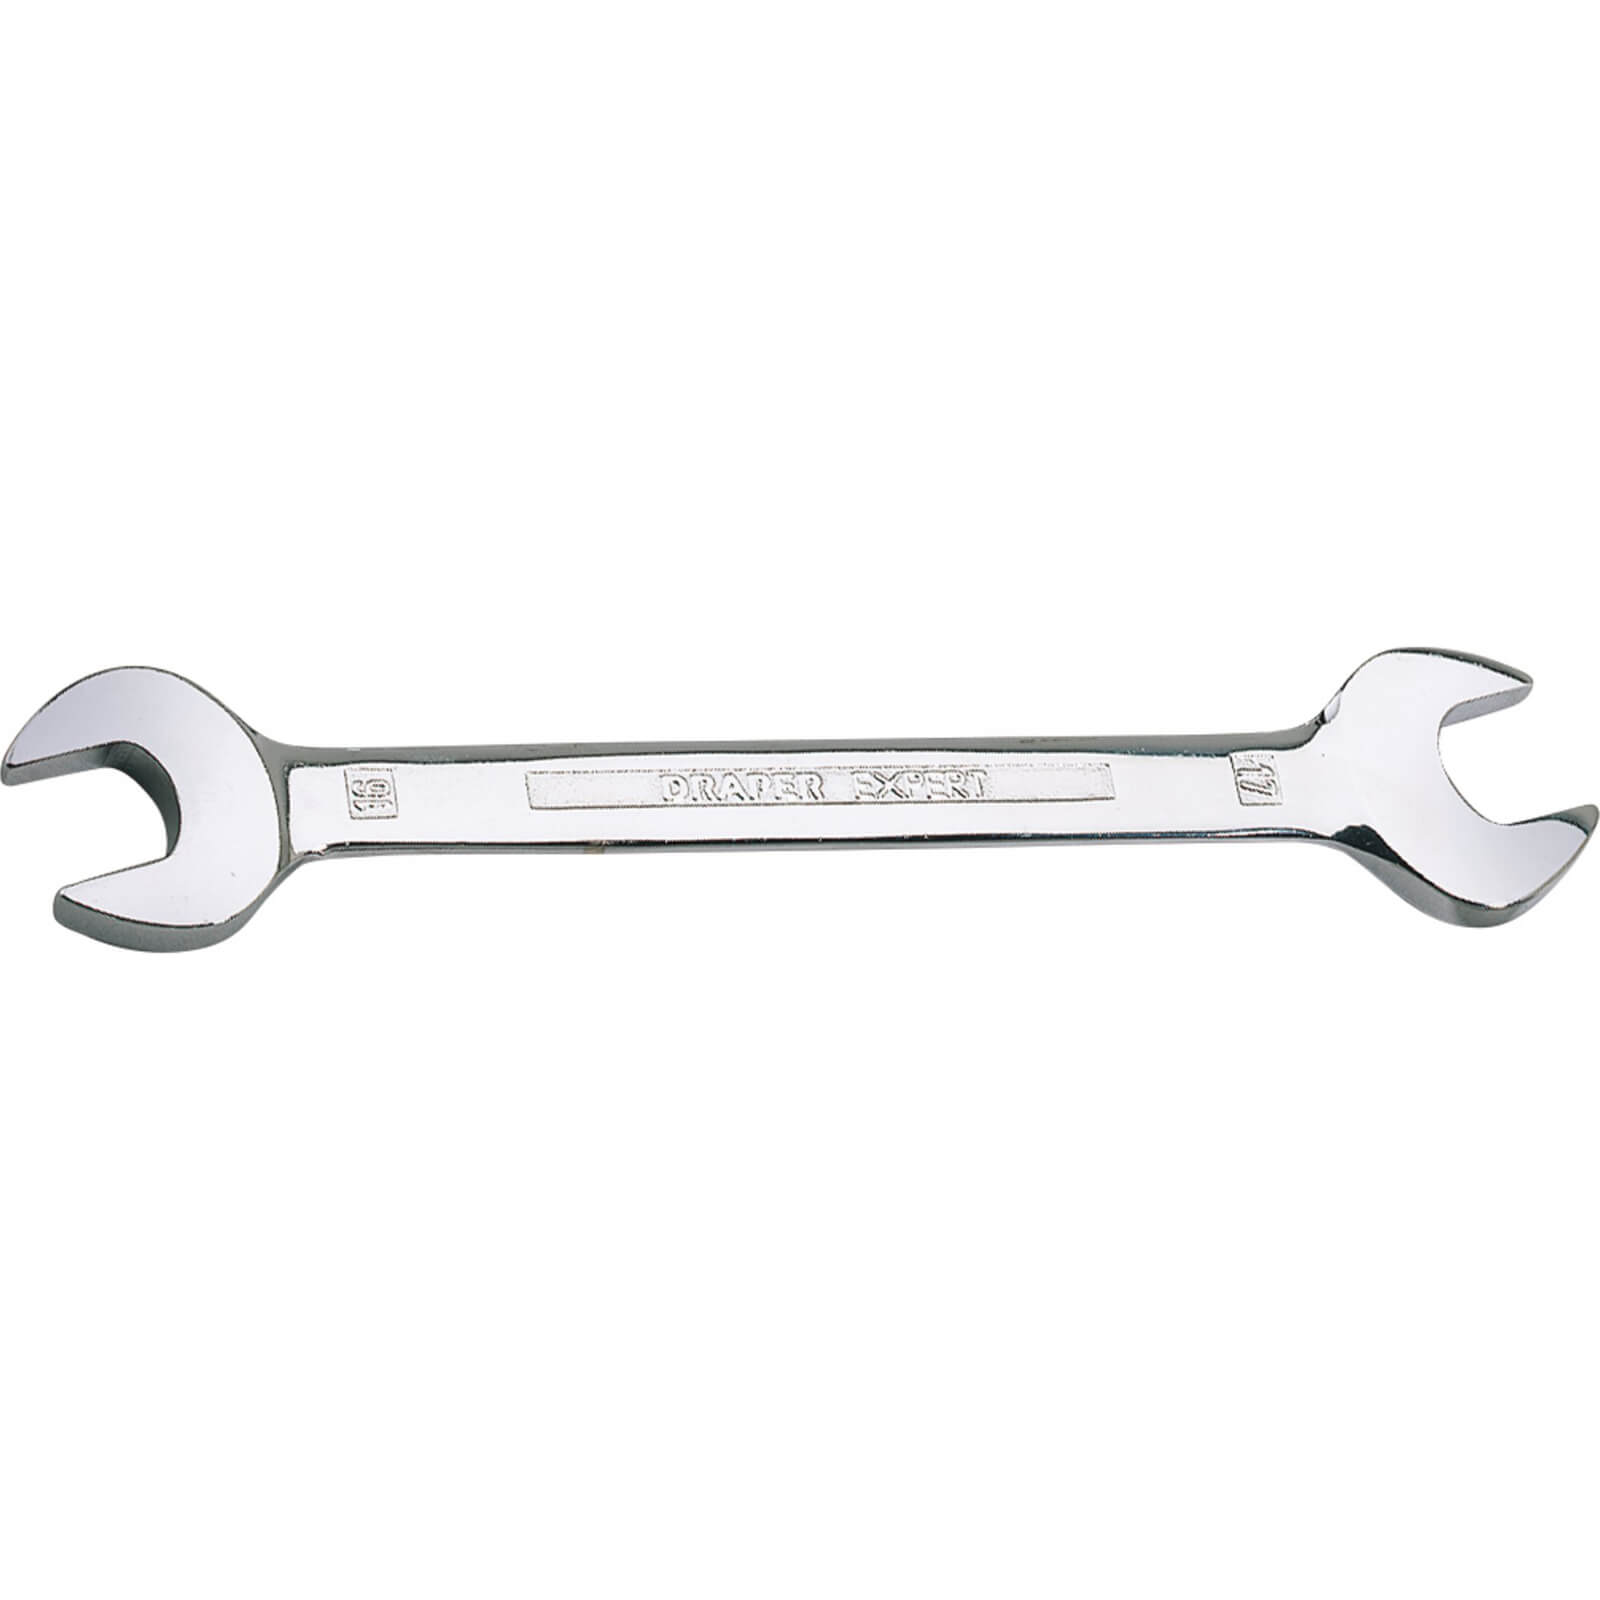 Image of Draper Expert Double Open Ended Spanner Metric 16mm x 17mm